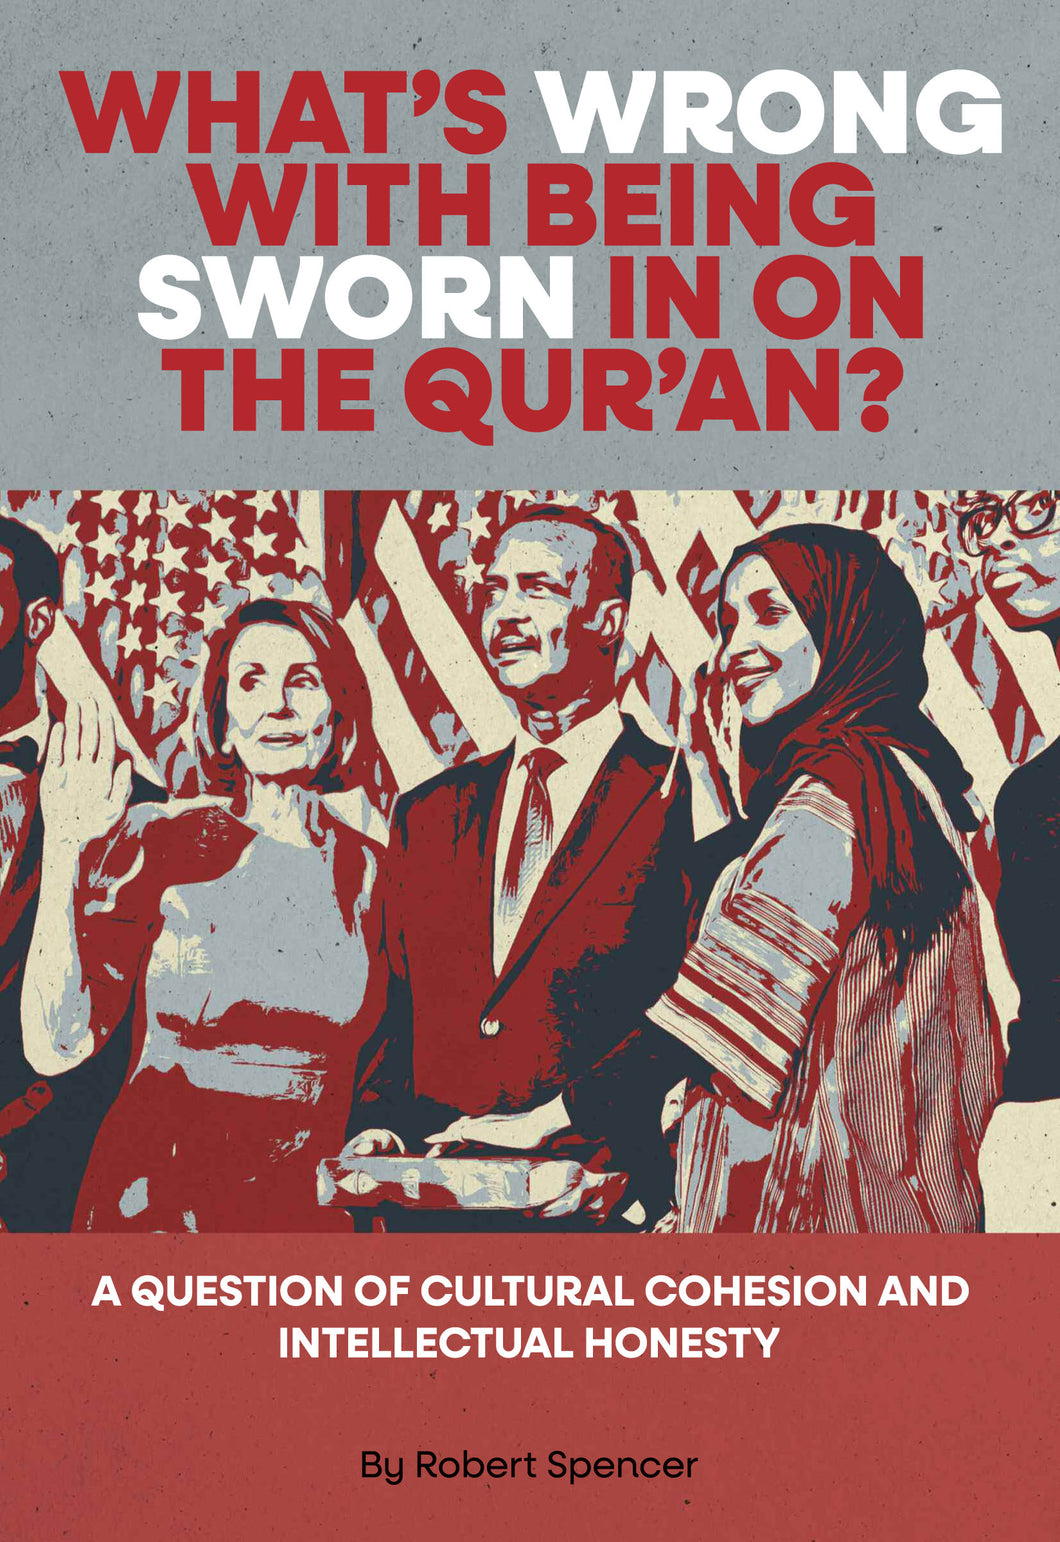 What's Wrong With Being Sworn In On The Qur'an?